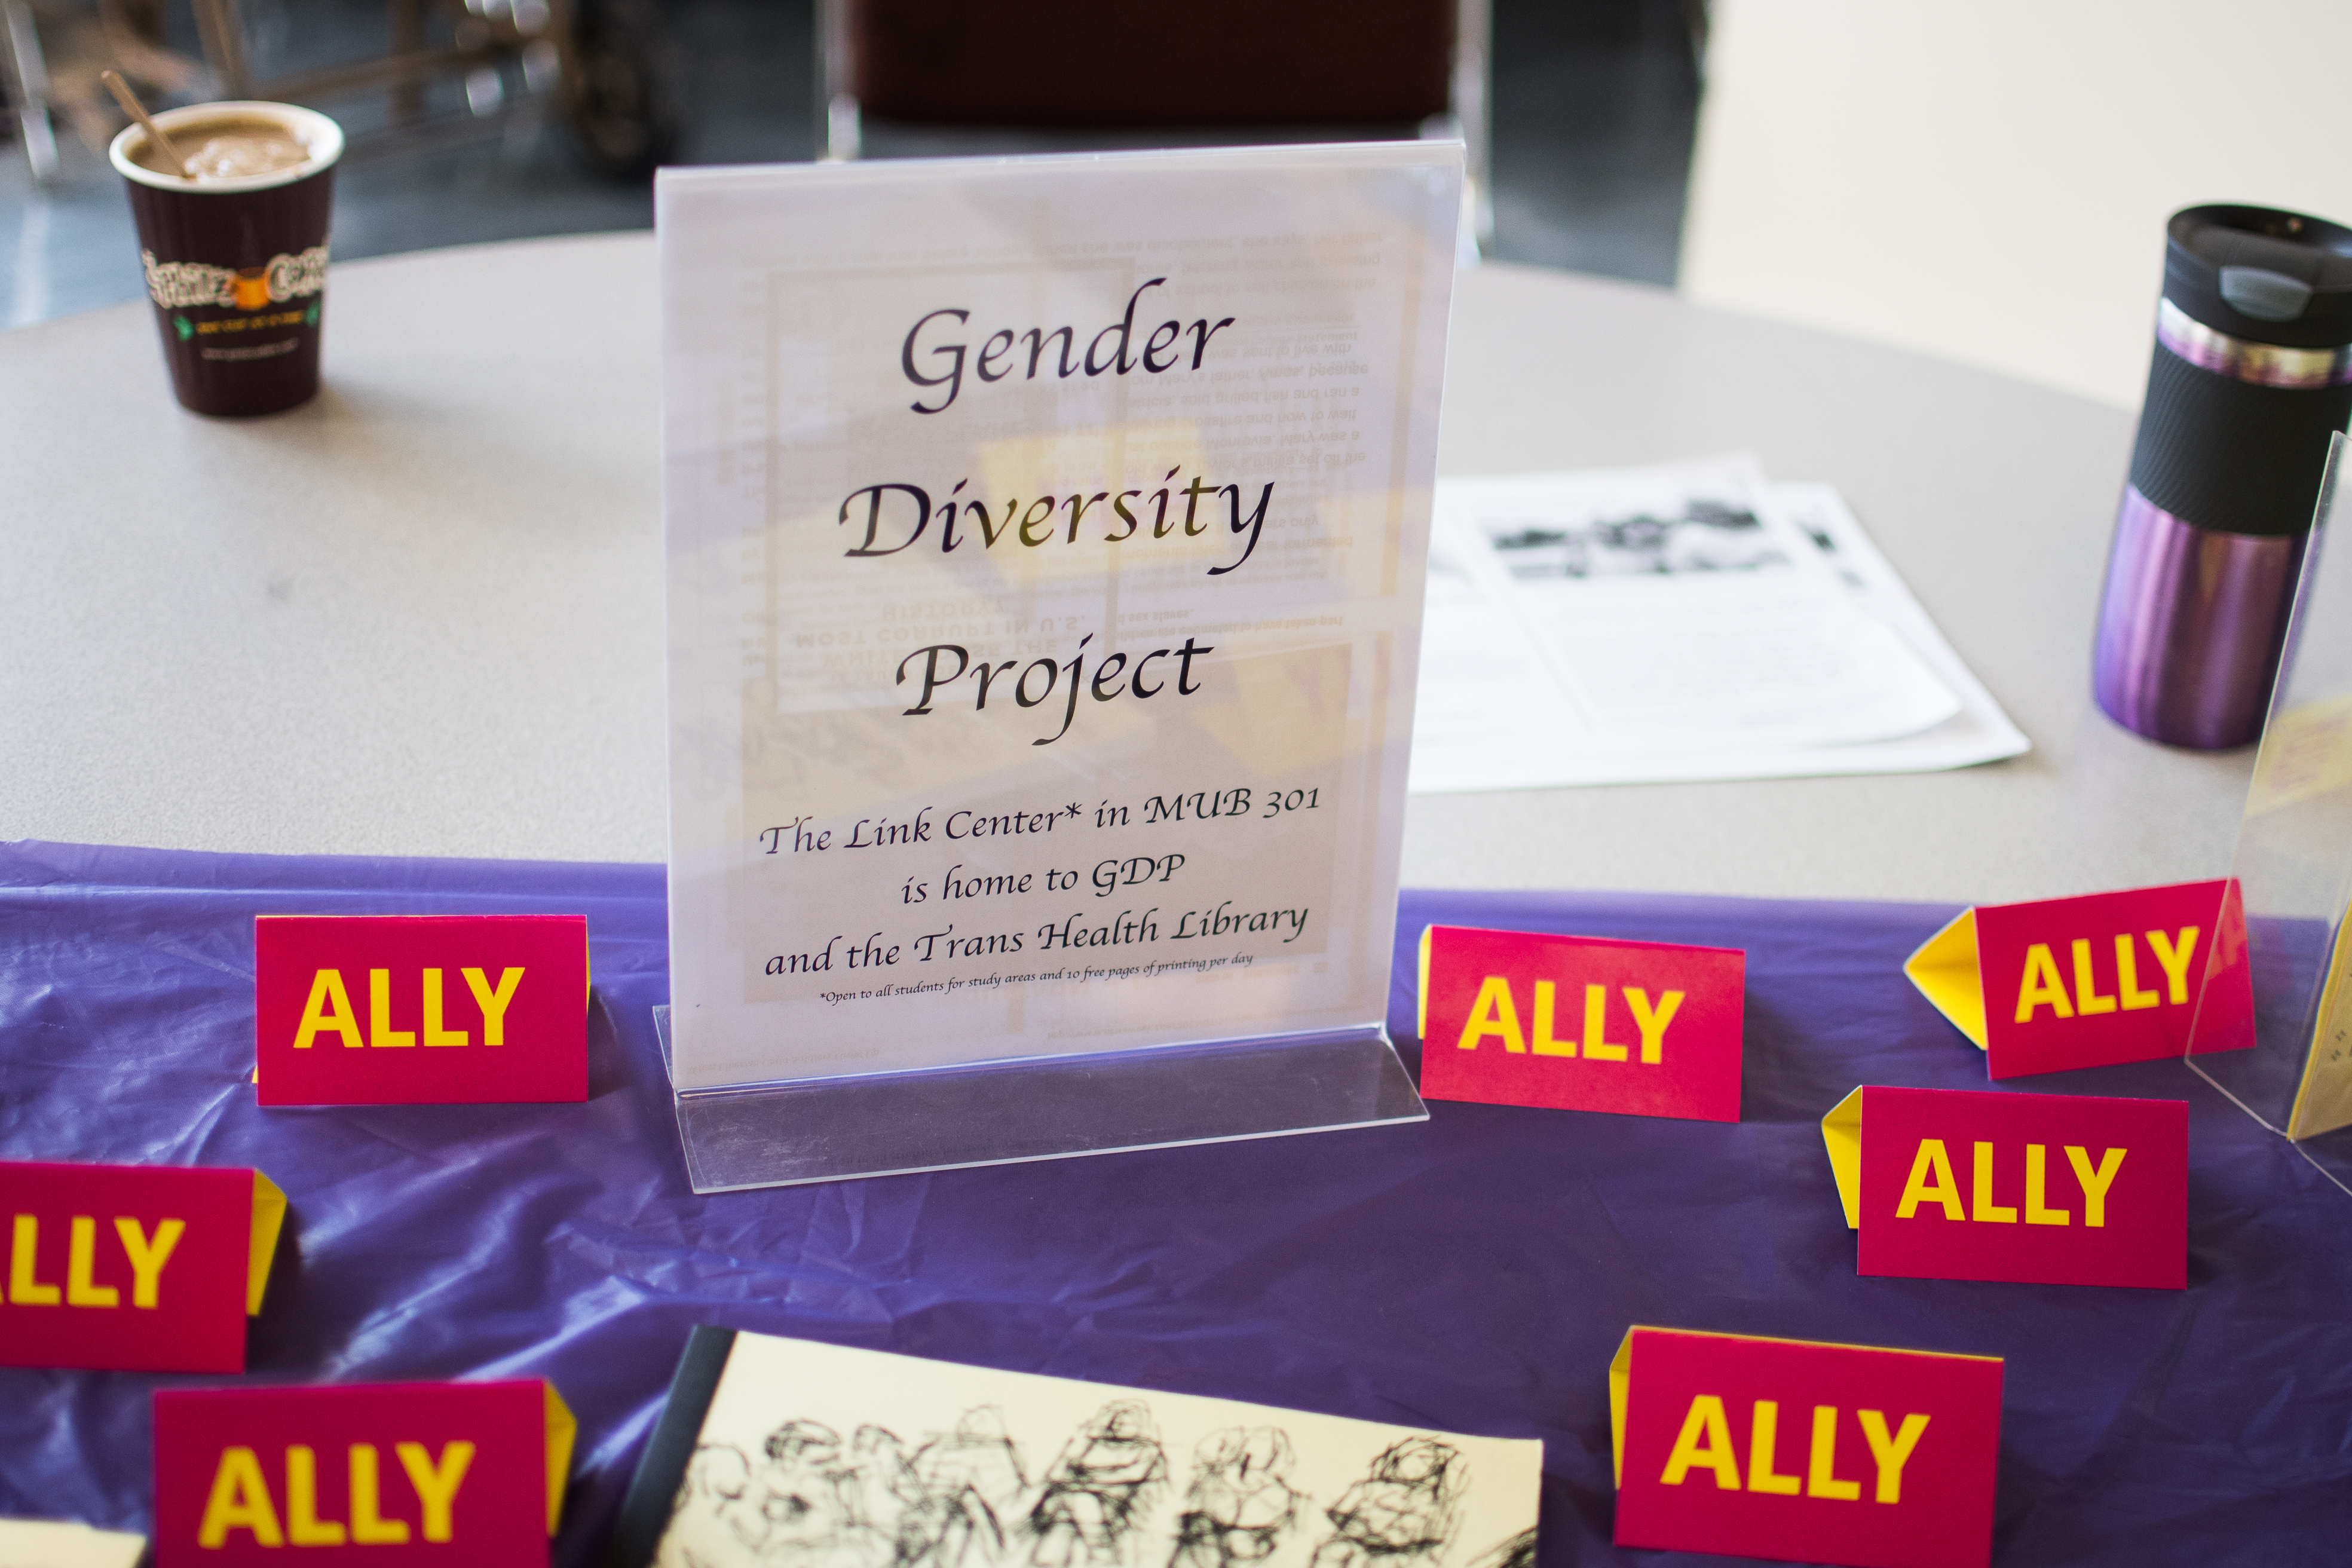 The display of City College’s Gender Diversity Project at the Multicultural Day organized by Associated Students at City College’s Ocean Campus in Smith Hall. Photo by Otto Pippenger Friday Nov. 10 2017.